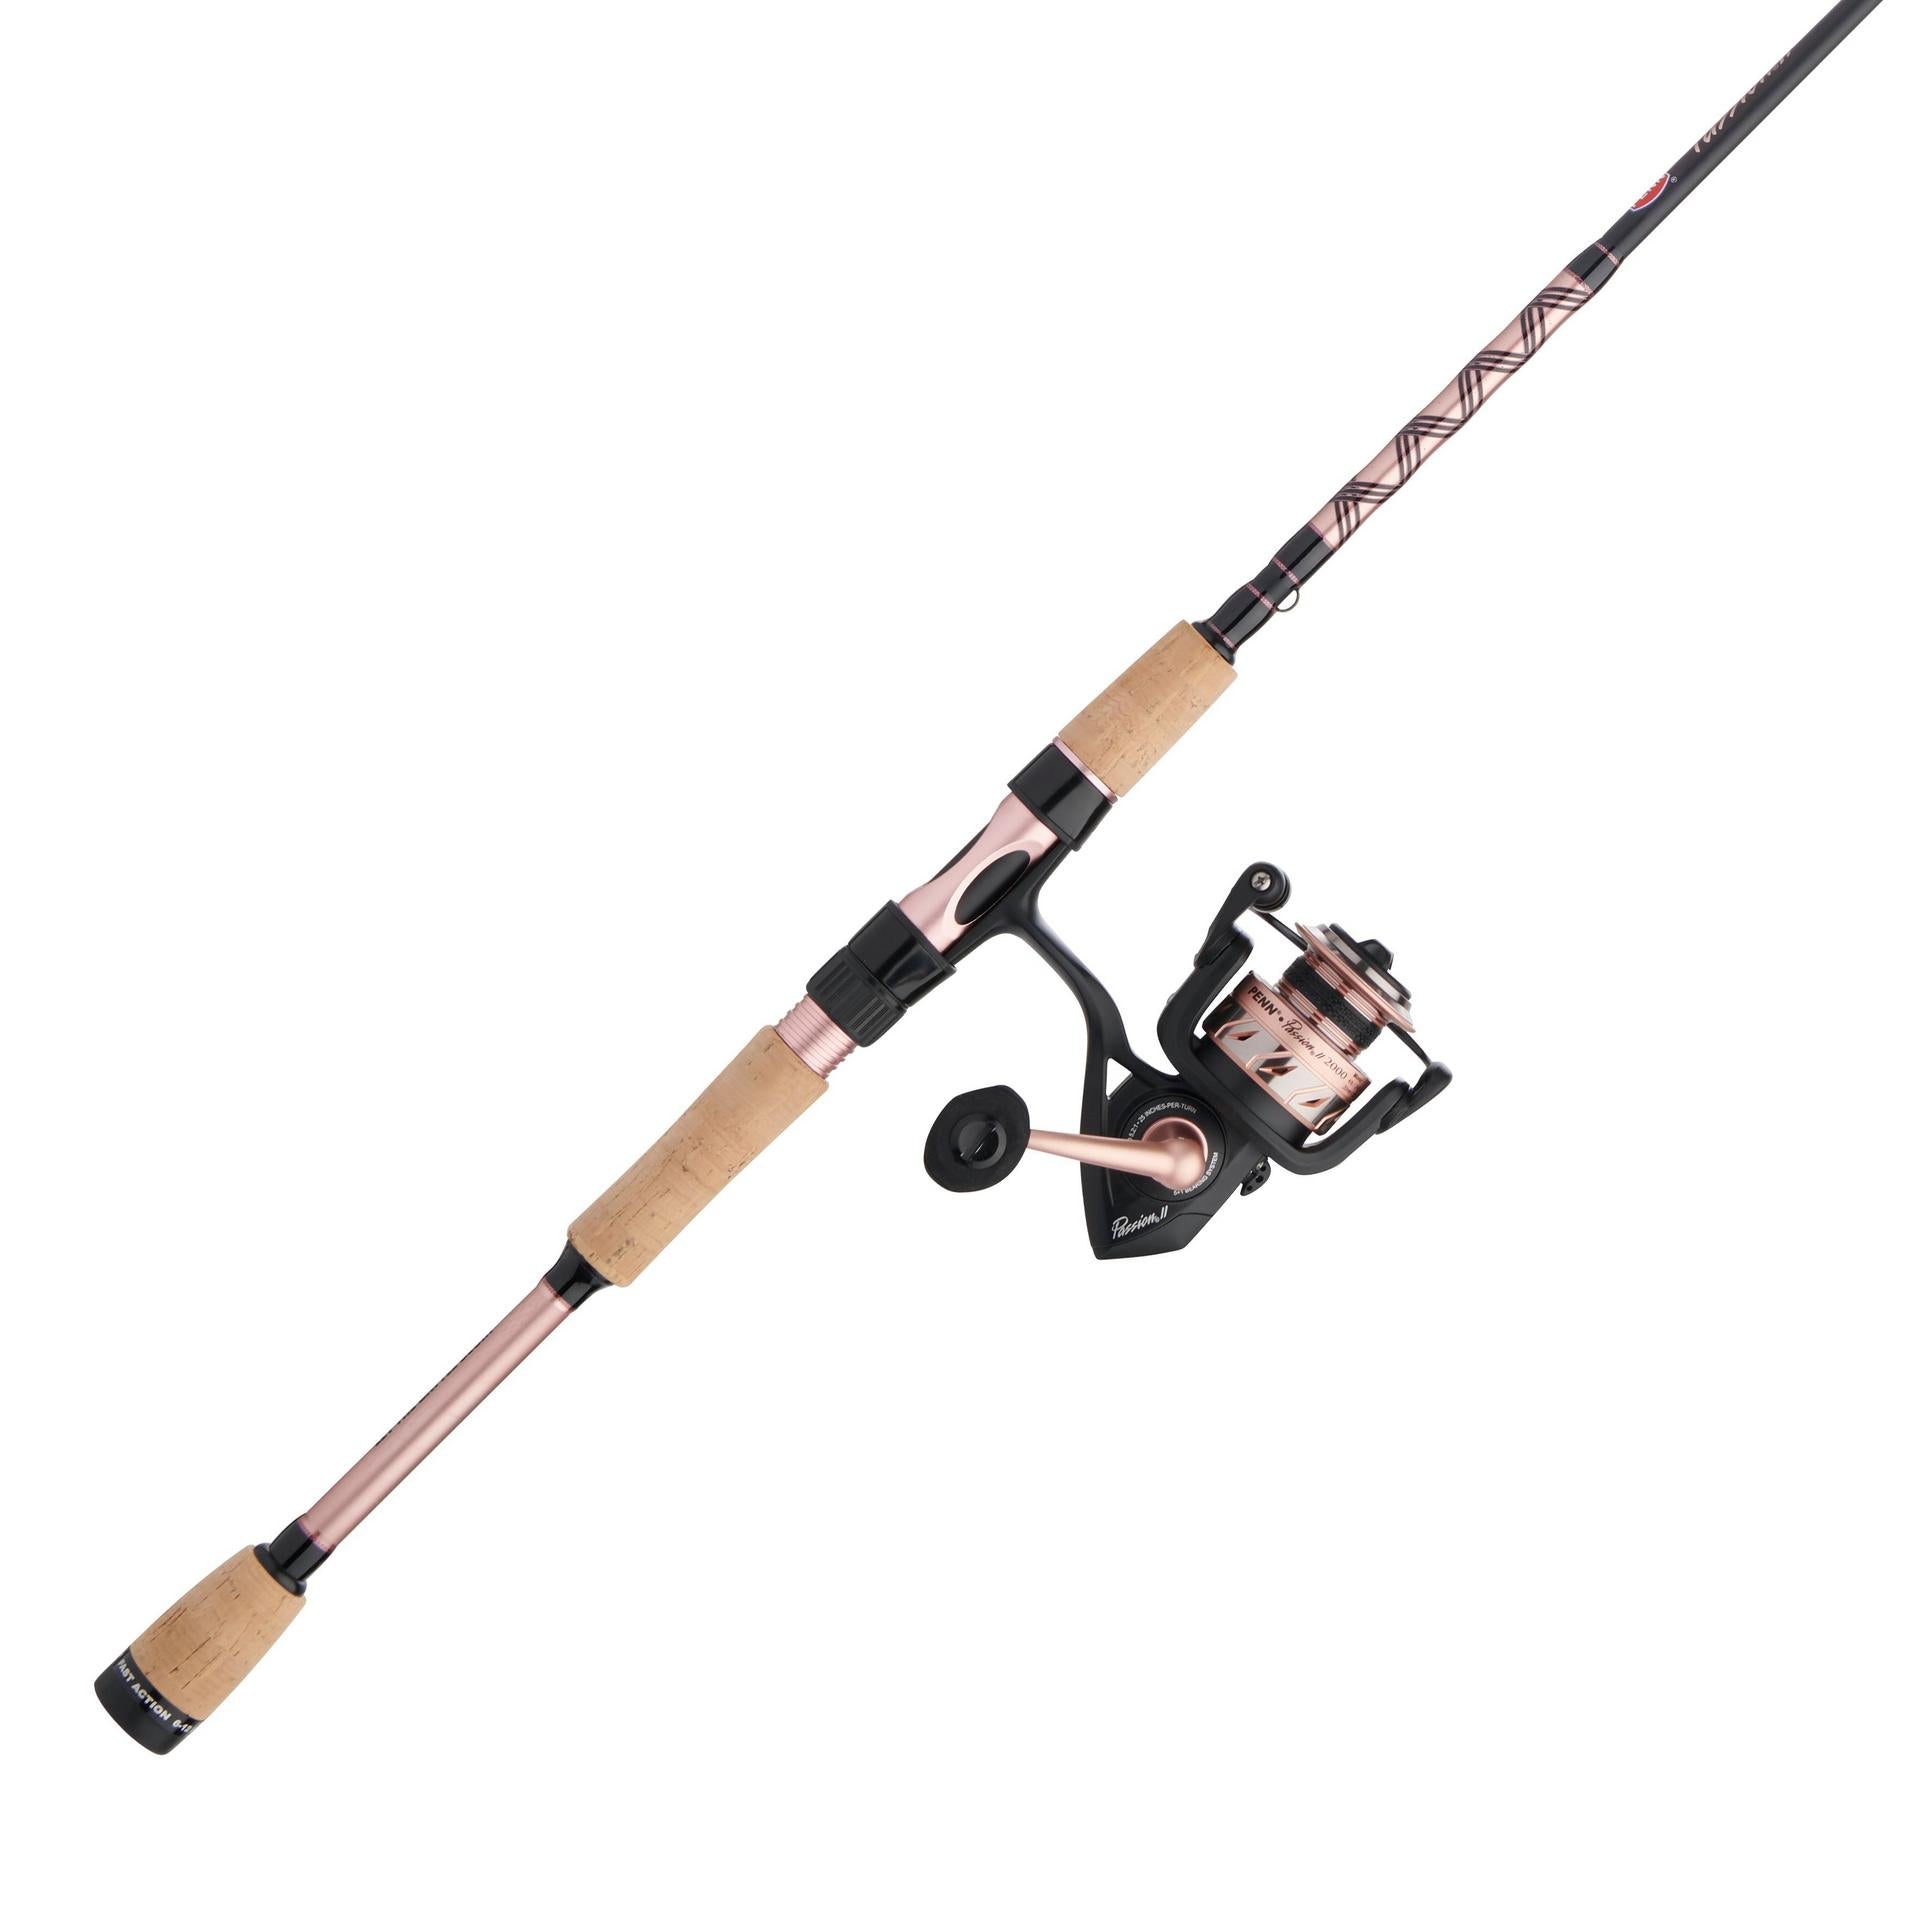 Complete Fishing Kit with Carbon 10' Match Rod. Includes